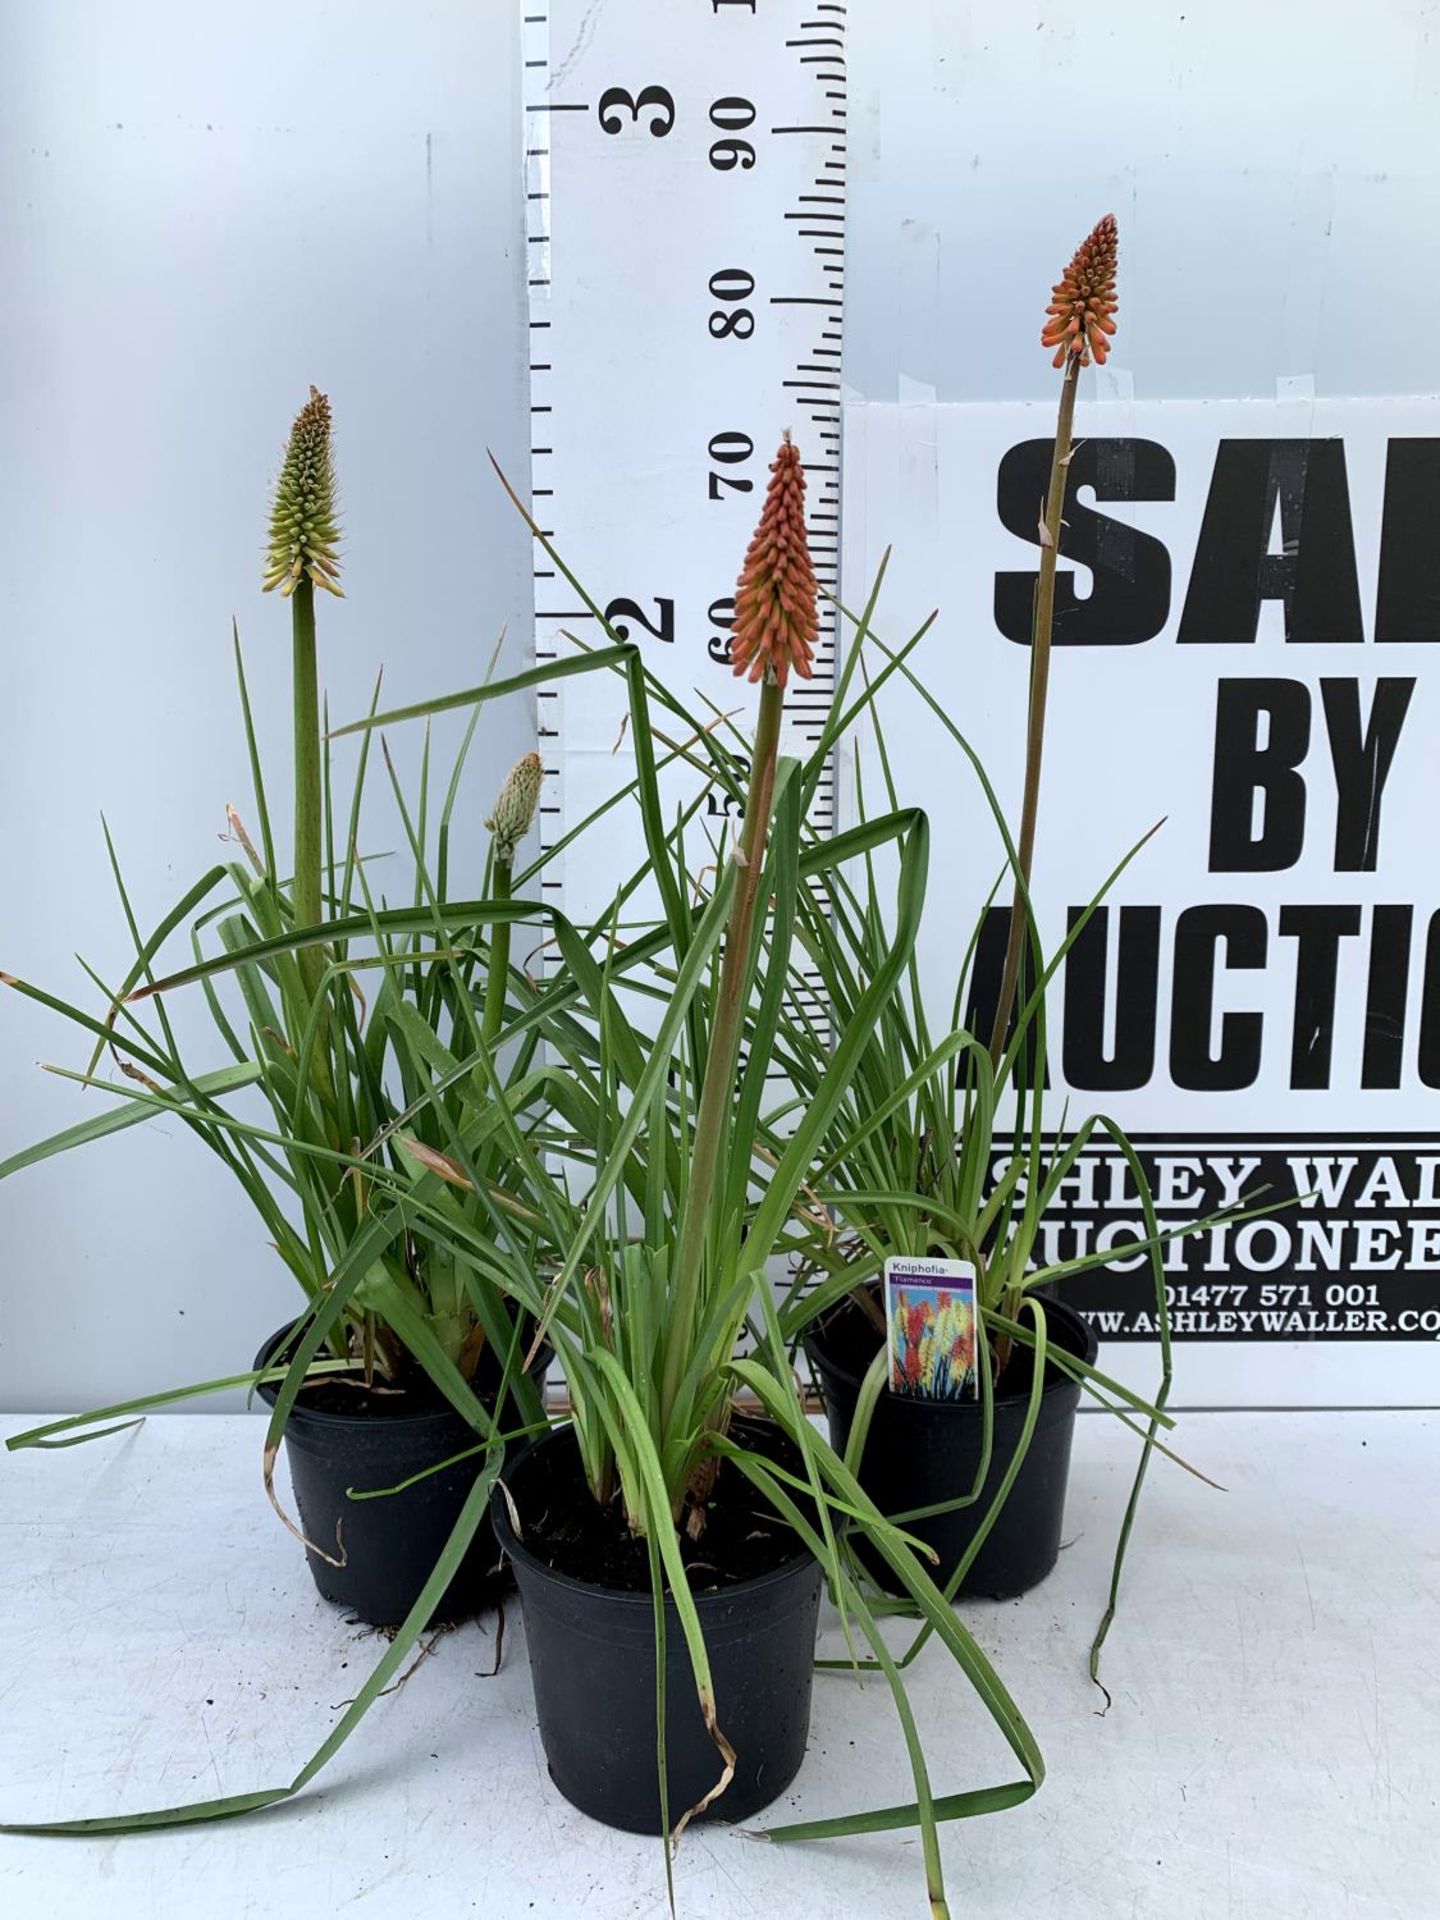 THREE KNIPHOFIA RED HOT POKER 'FLAMENCO' IN 2 LTR POTS APPROX 70- 80CM IN HEIGHT PLUS VAT TO BE SOLD